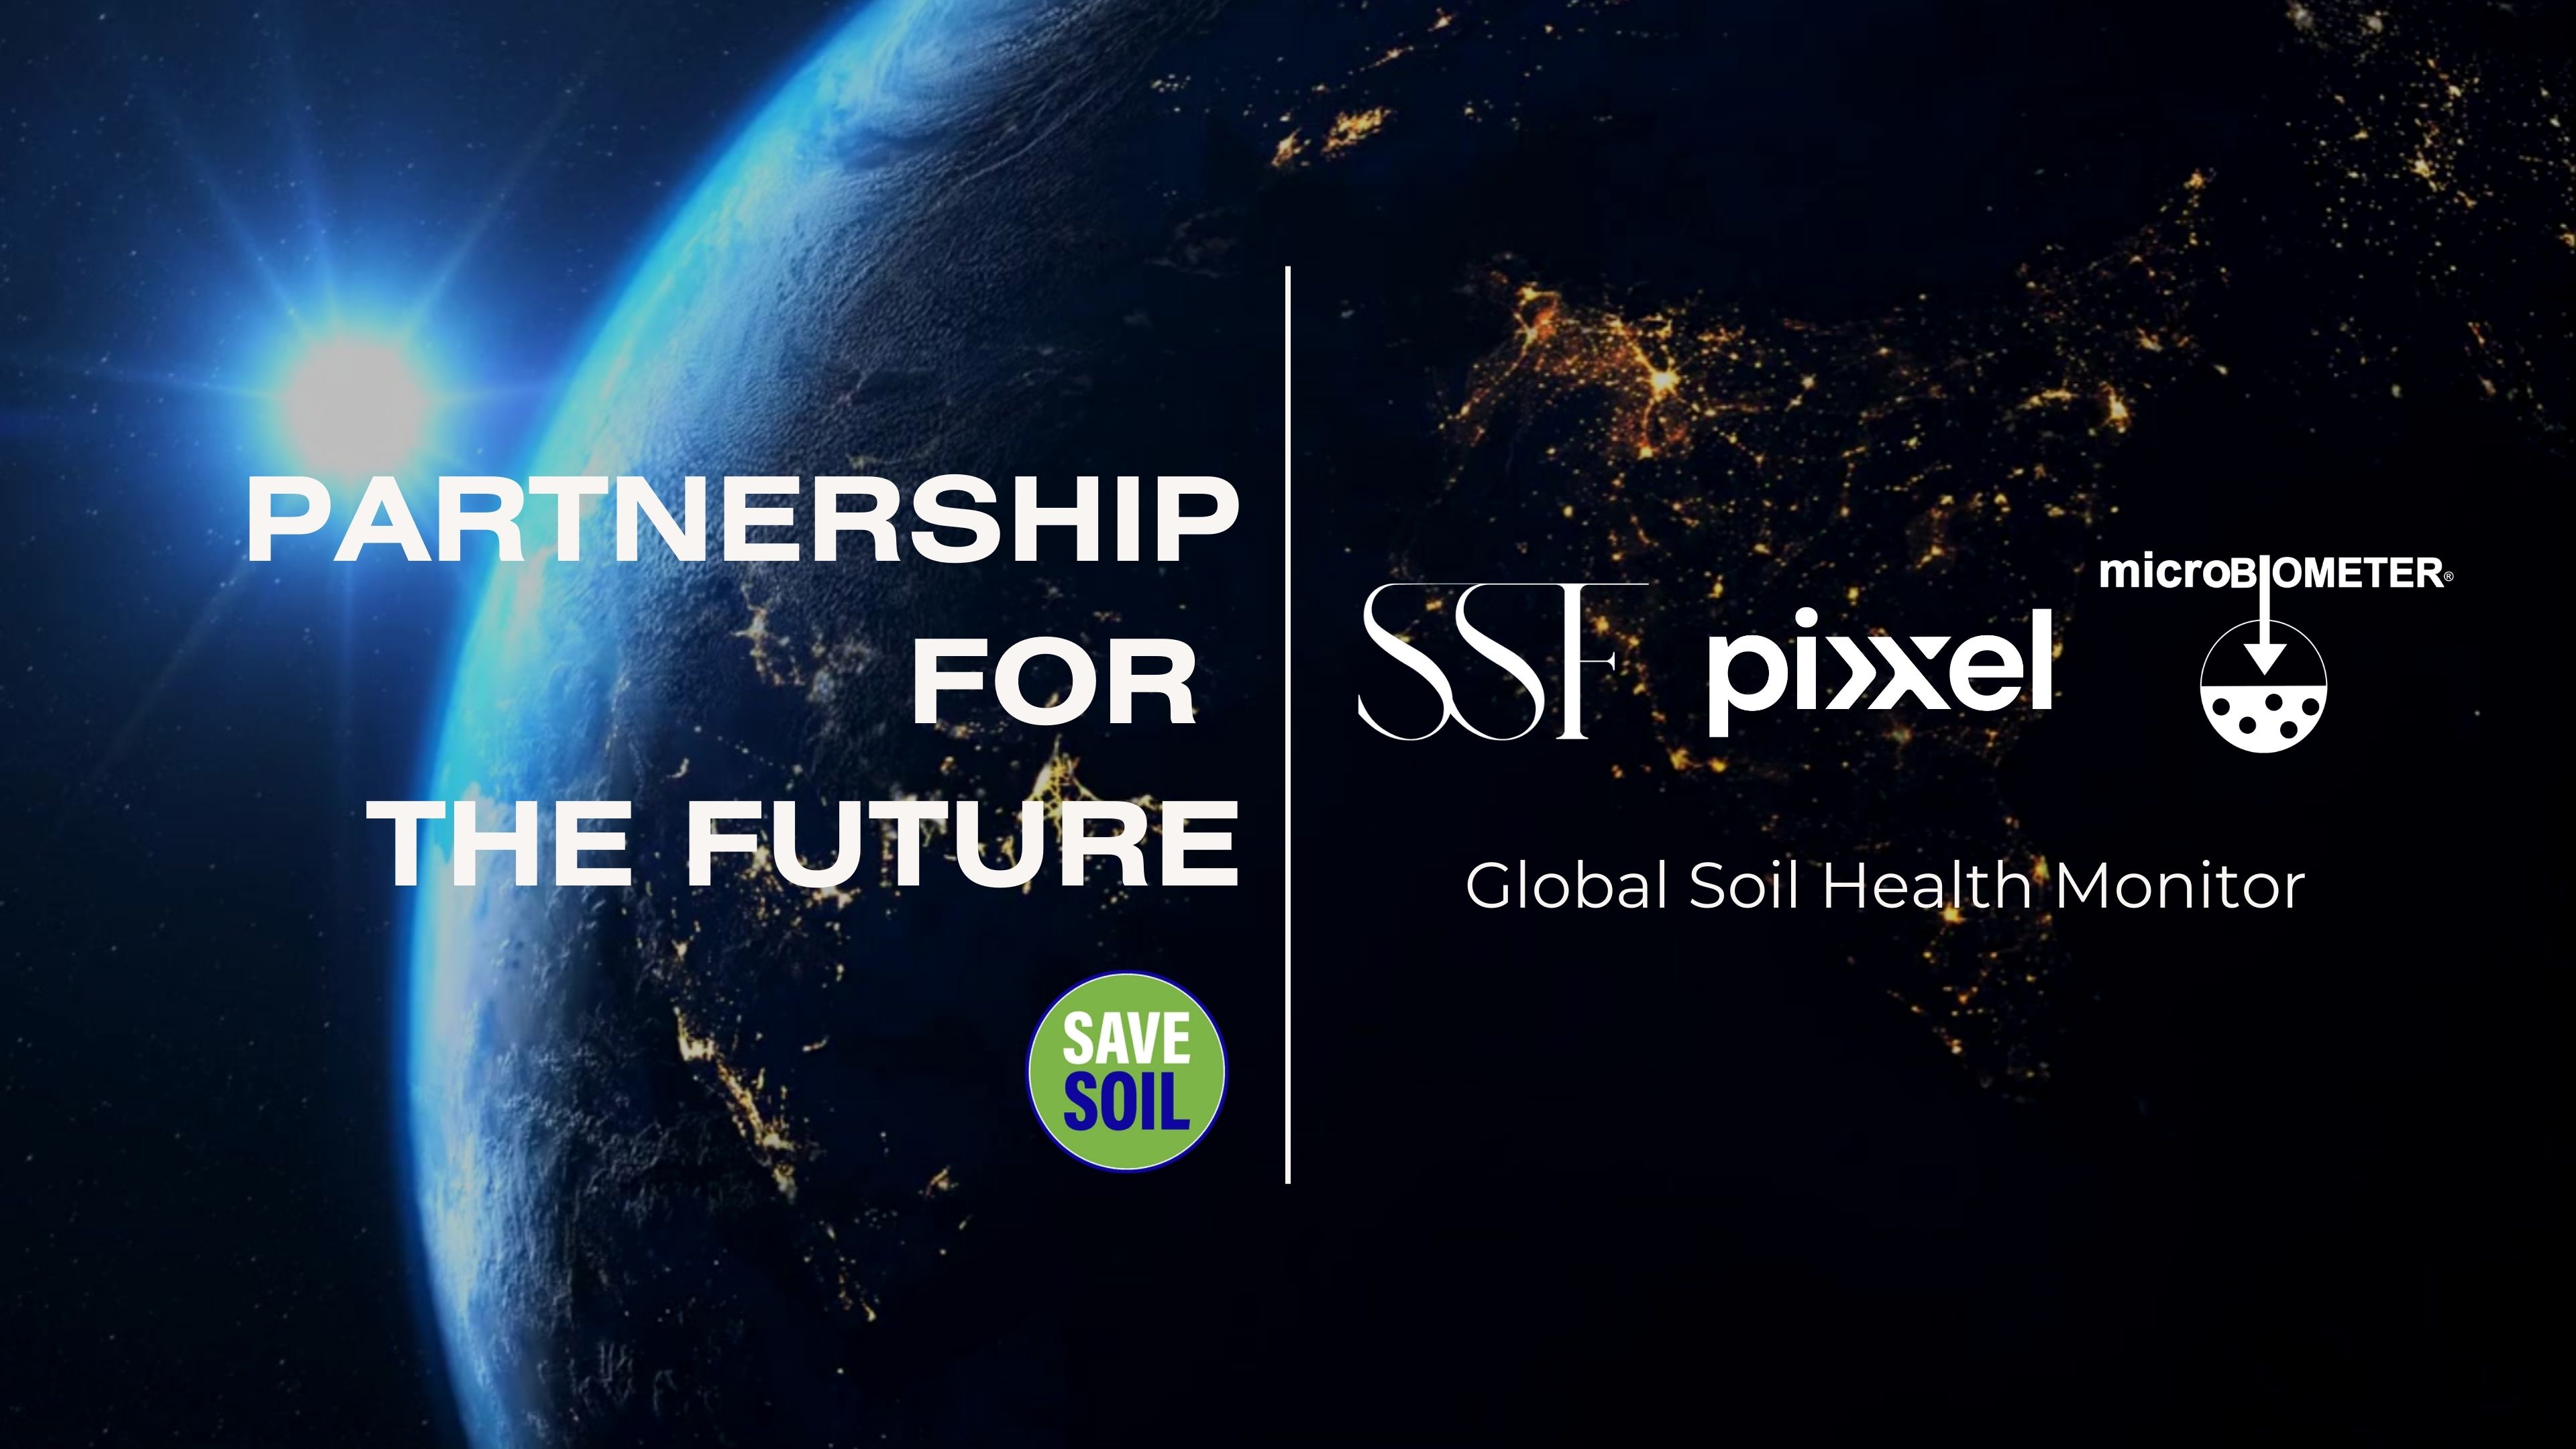 Save Soil Partners With Pixxel and Microbiometer For Building Global Soil Health Monitor